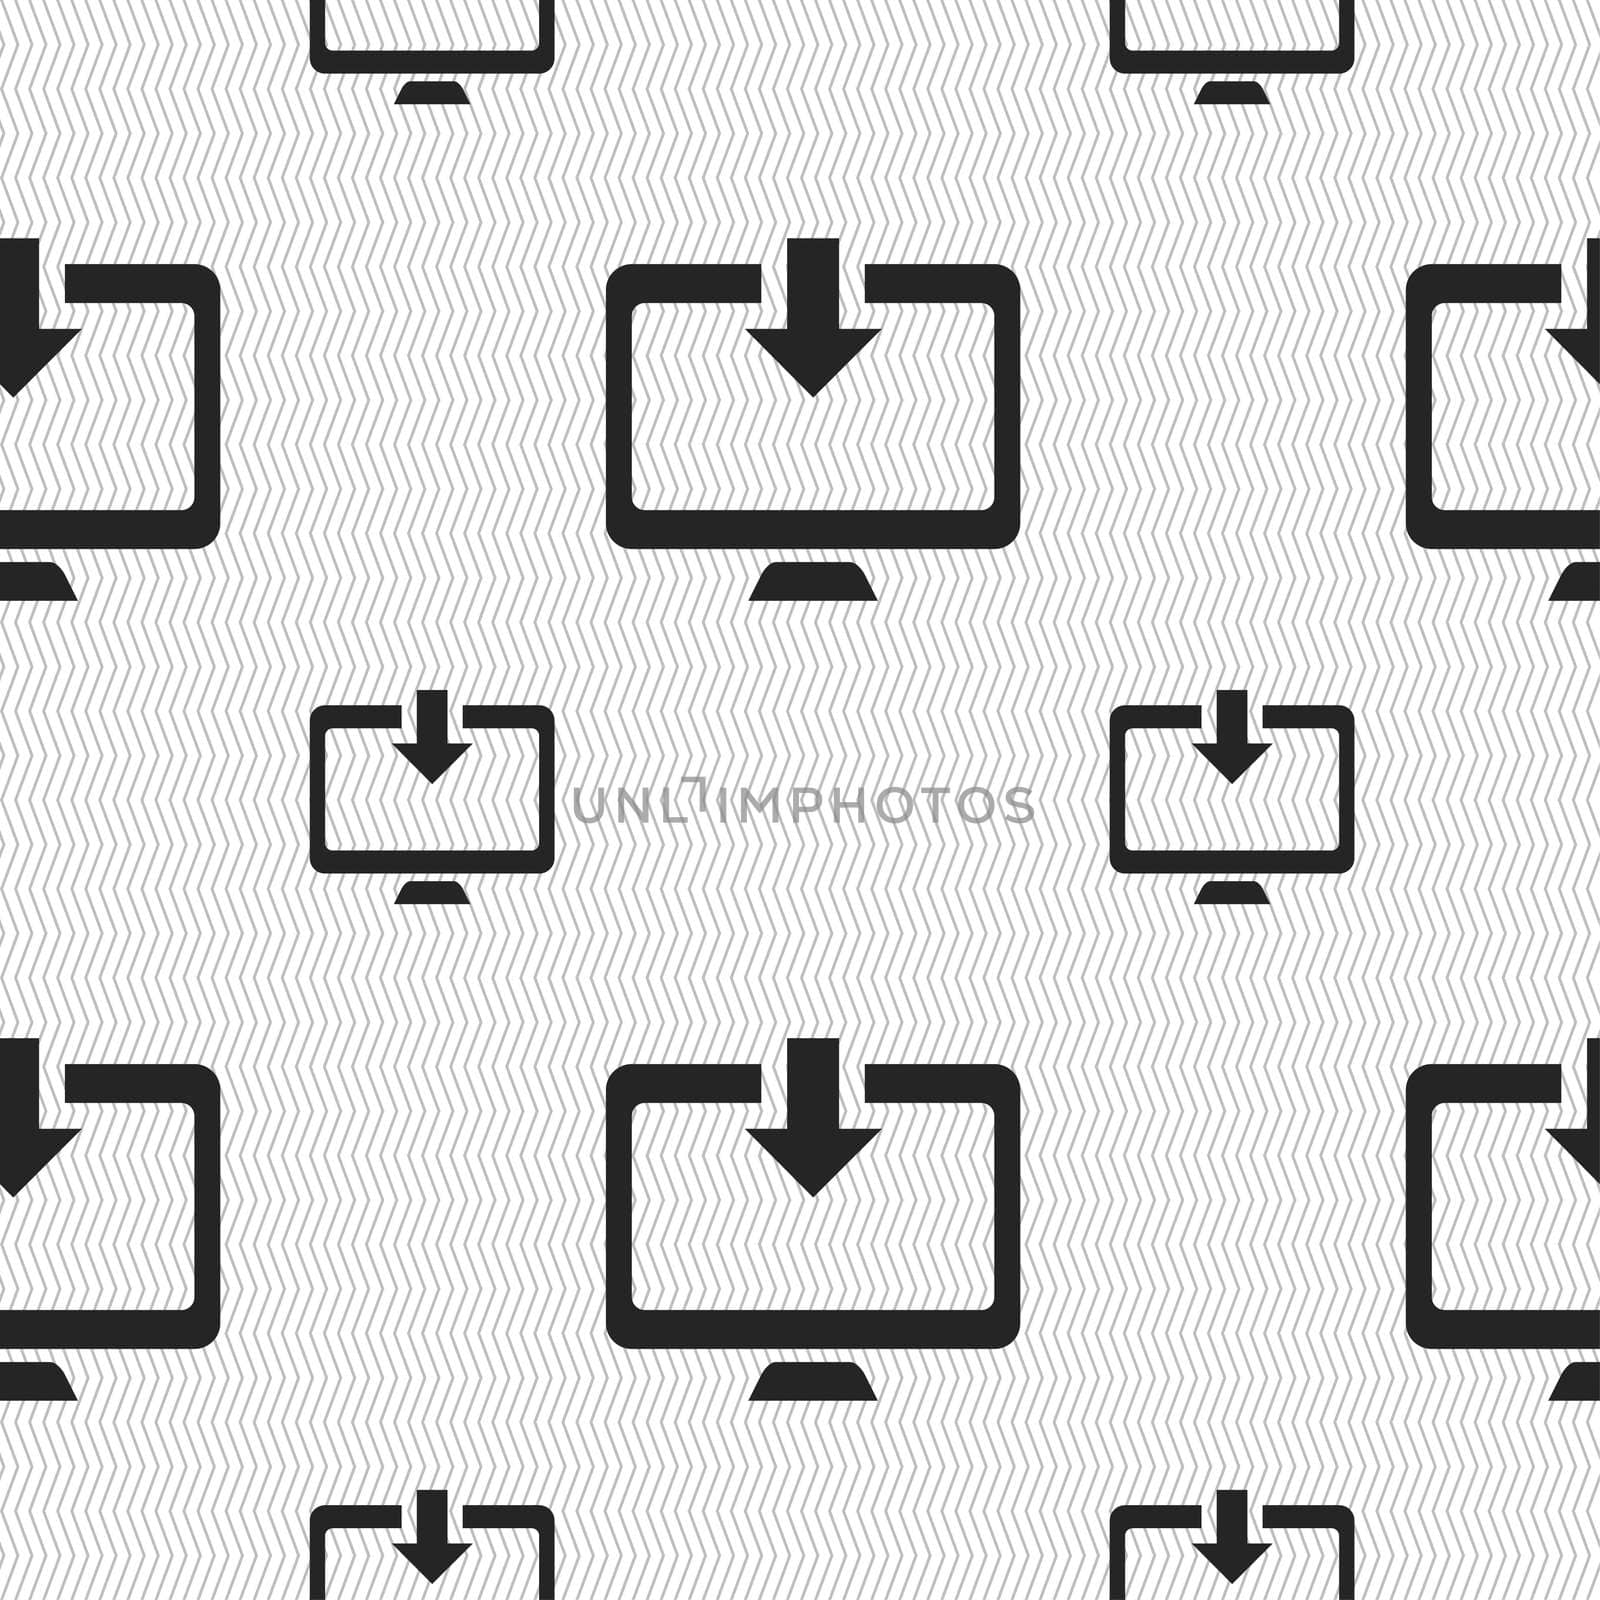 Download, Load, Backup icon sign. Seamless pattern with geometric texture. illustration